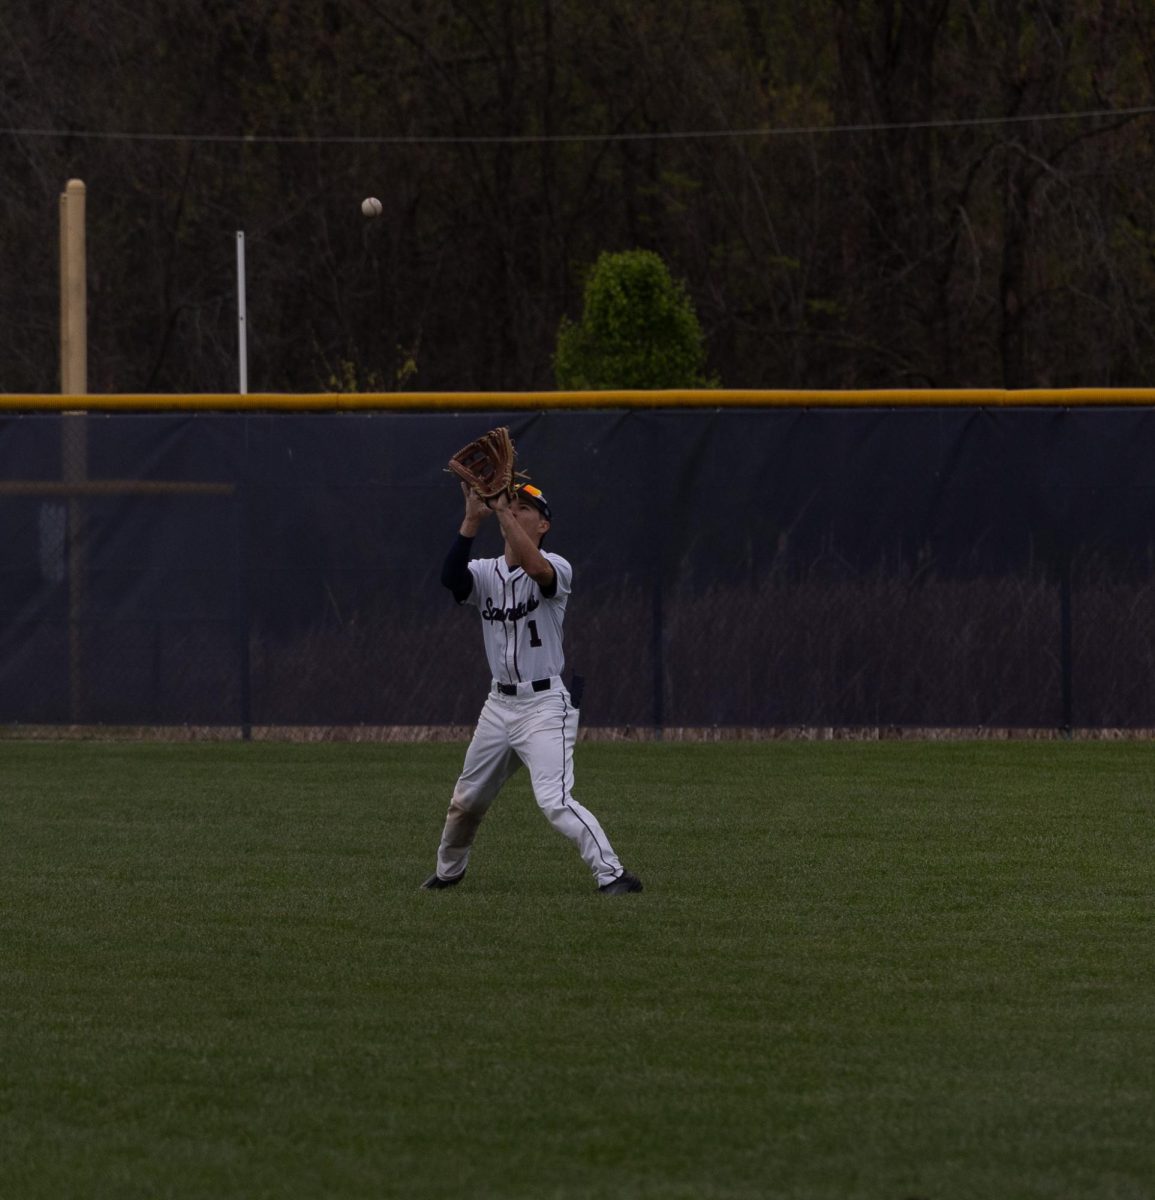 Junior Ethan Callison reads the pop fly and gets under it to catch the ball and make an out.